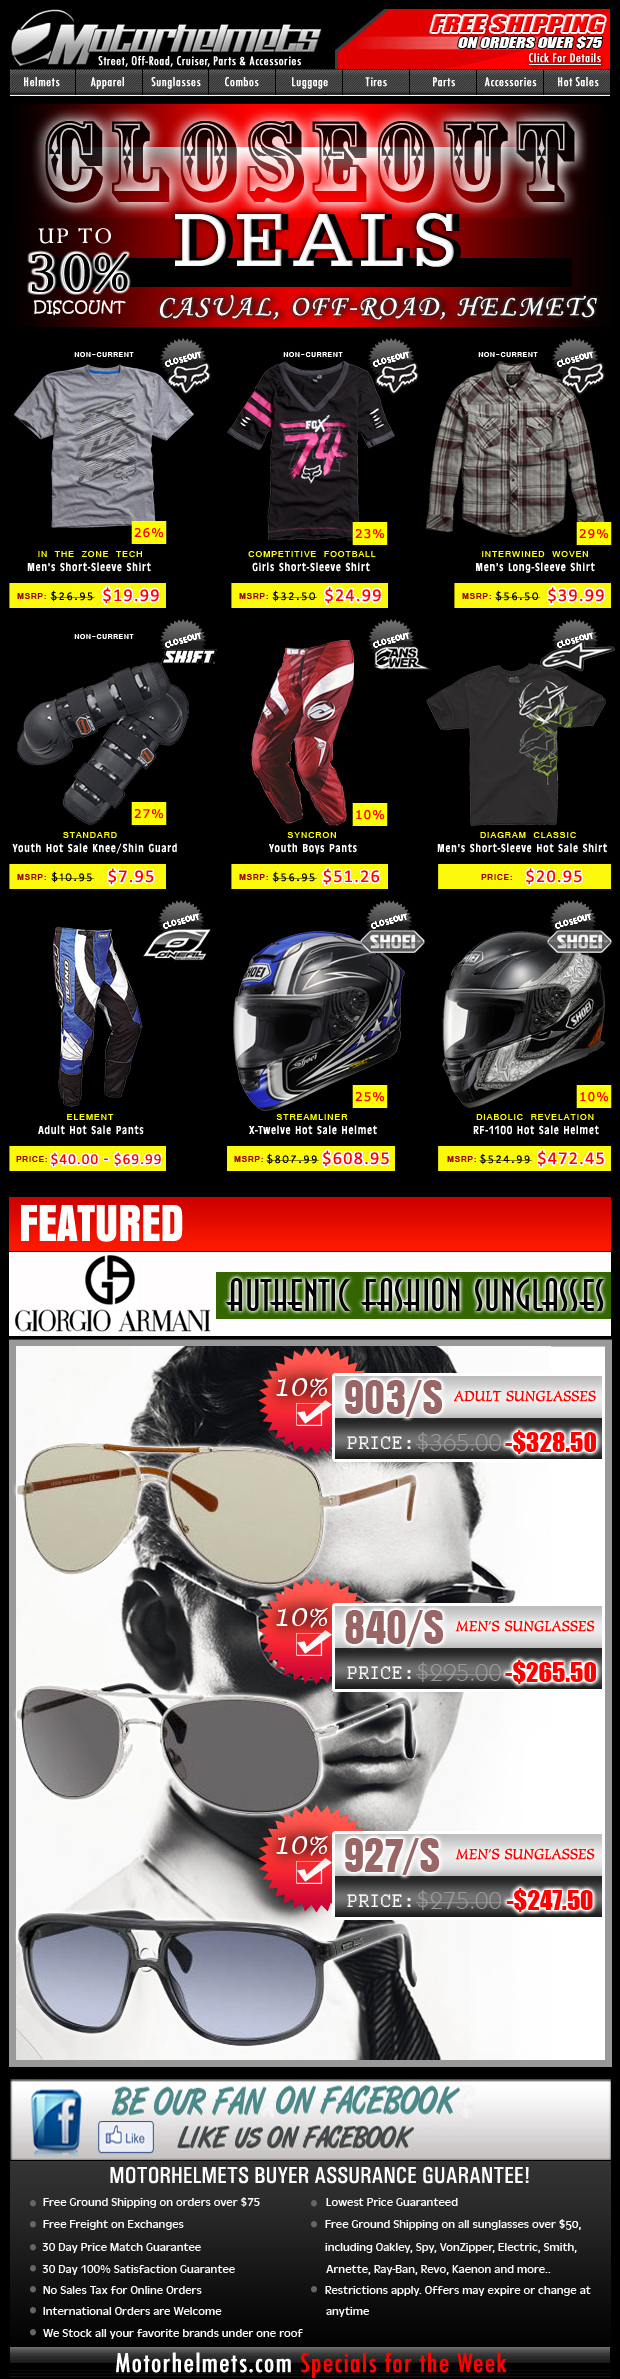 Save up to 30% off on Premium Closeouts from Fox, Shoei, O'Neal, and more!